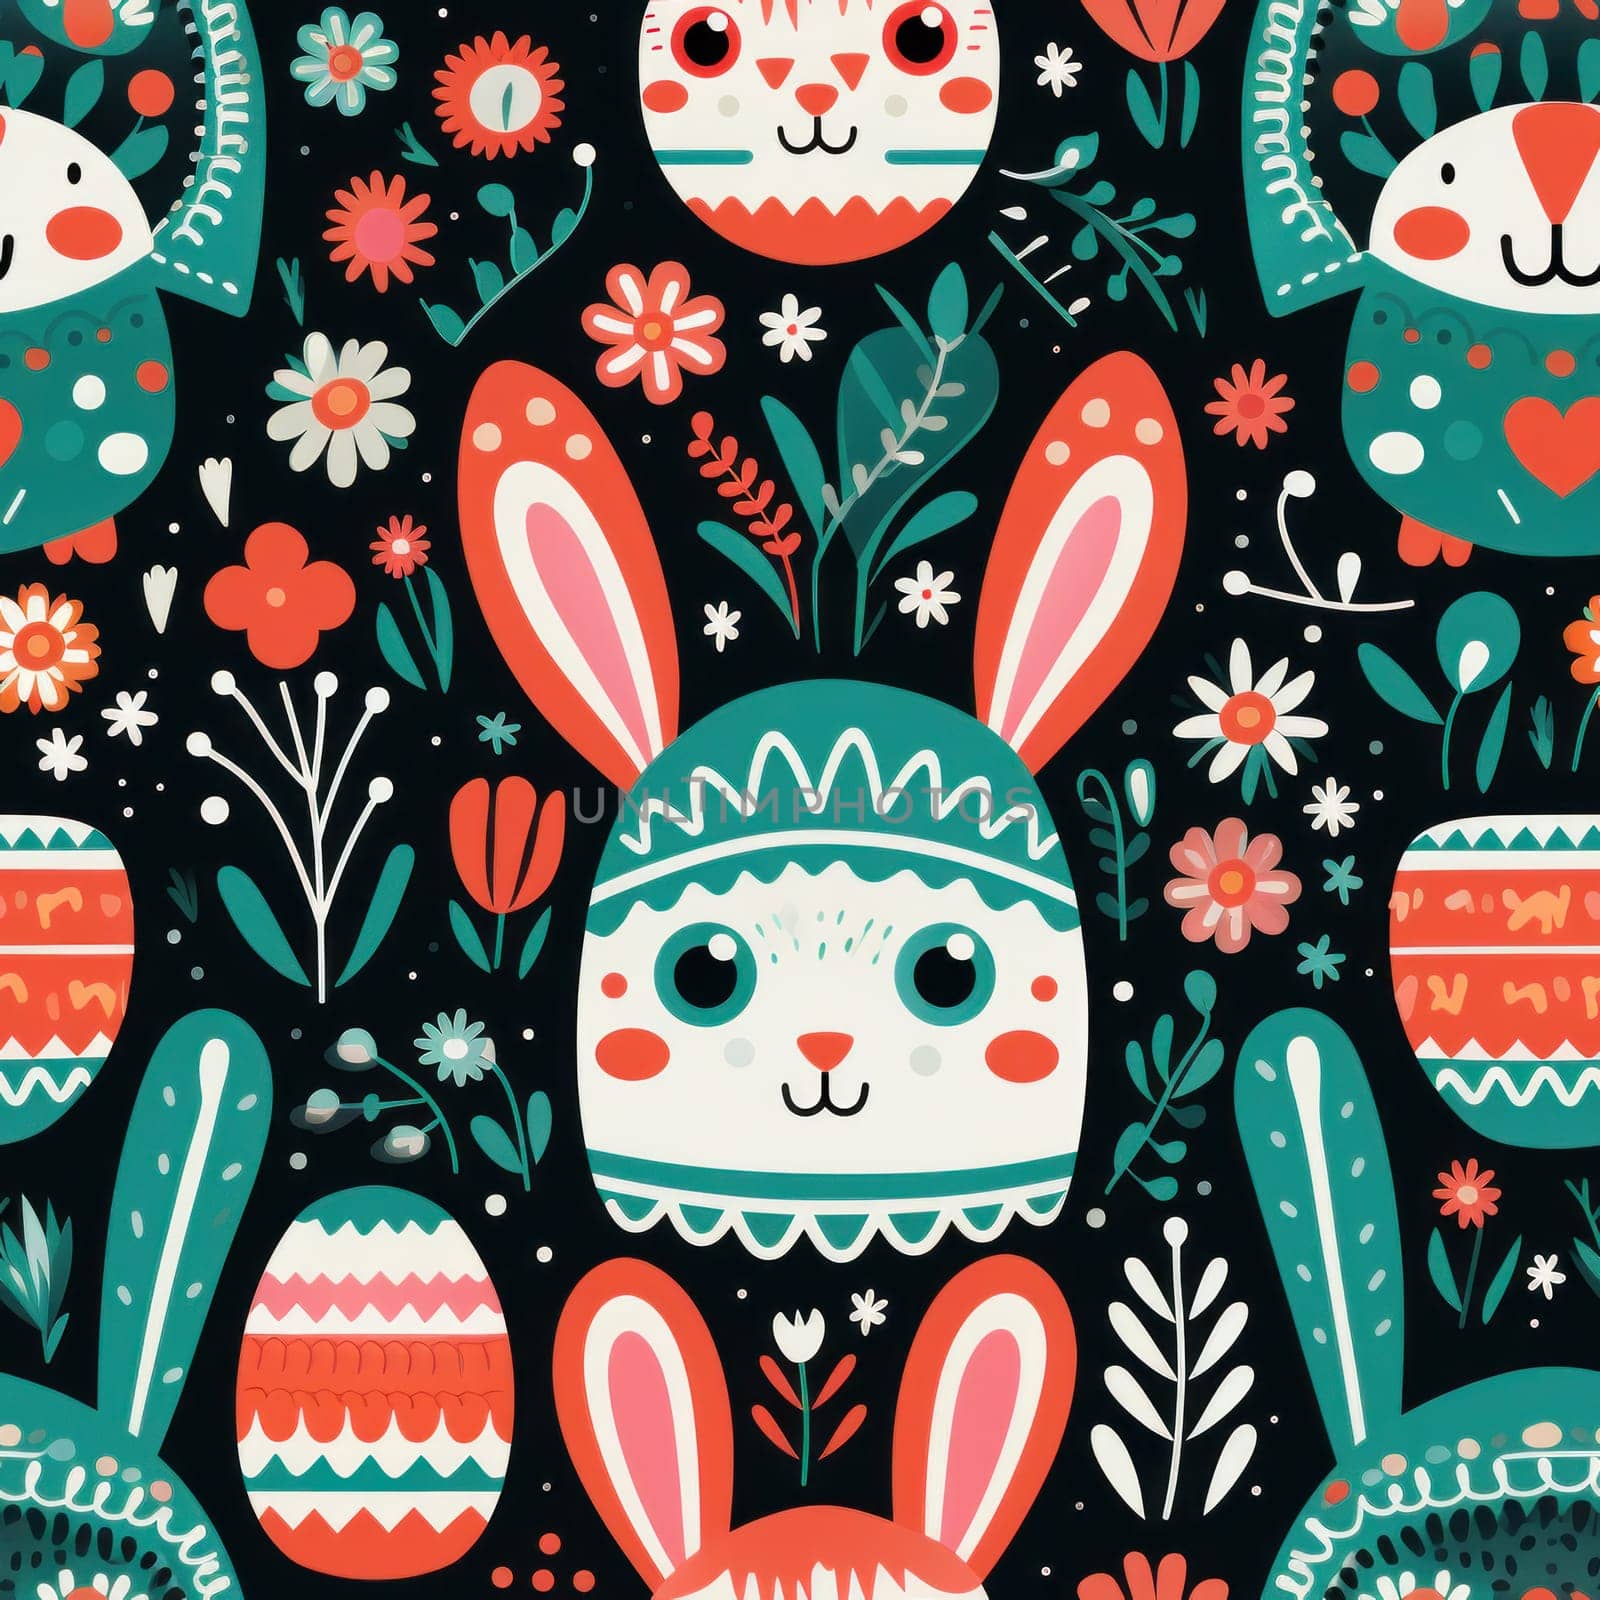 A pattern with cute bunny and flower designs on a black background, AI by starush